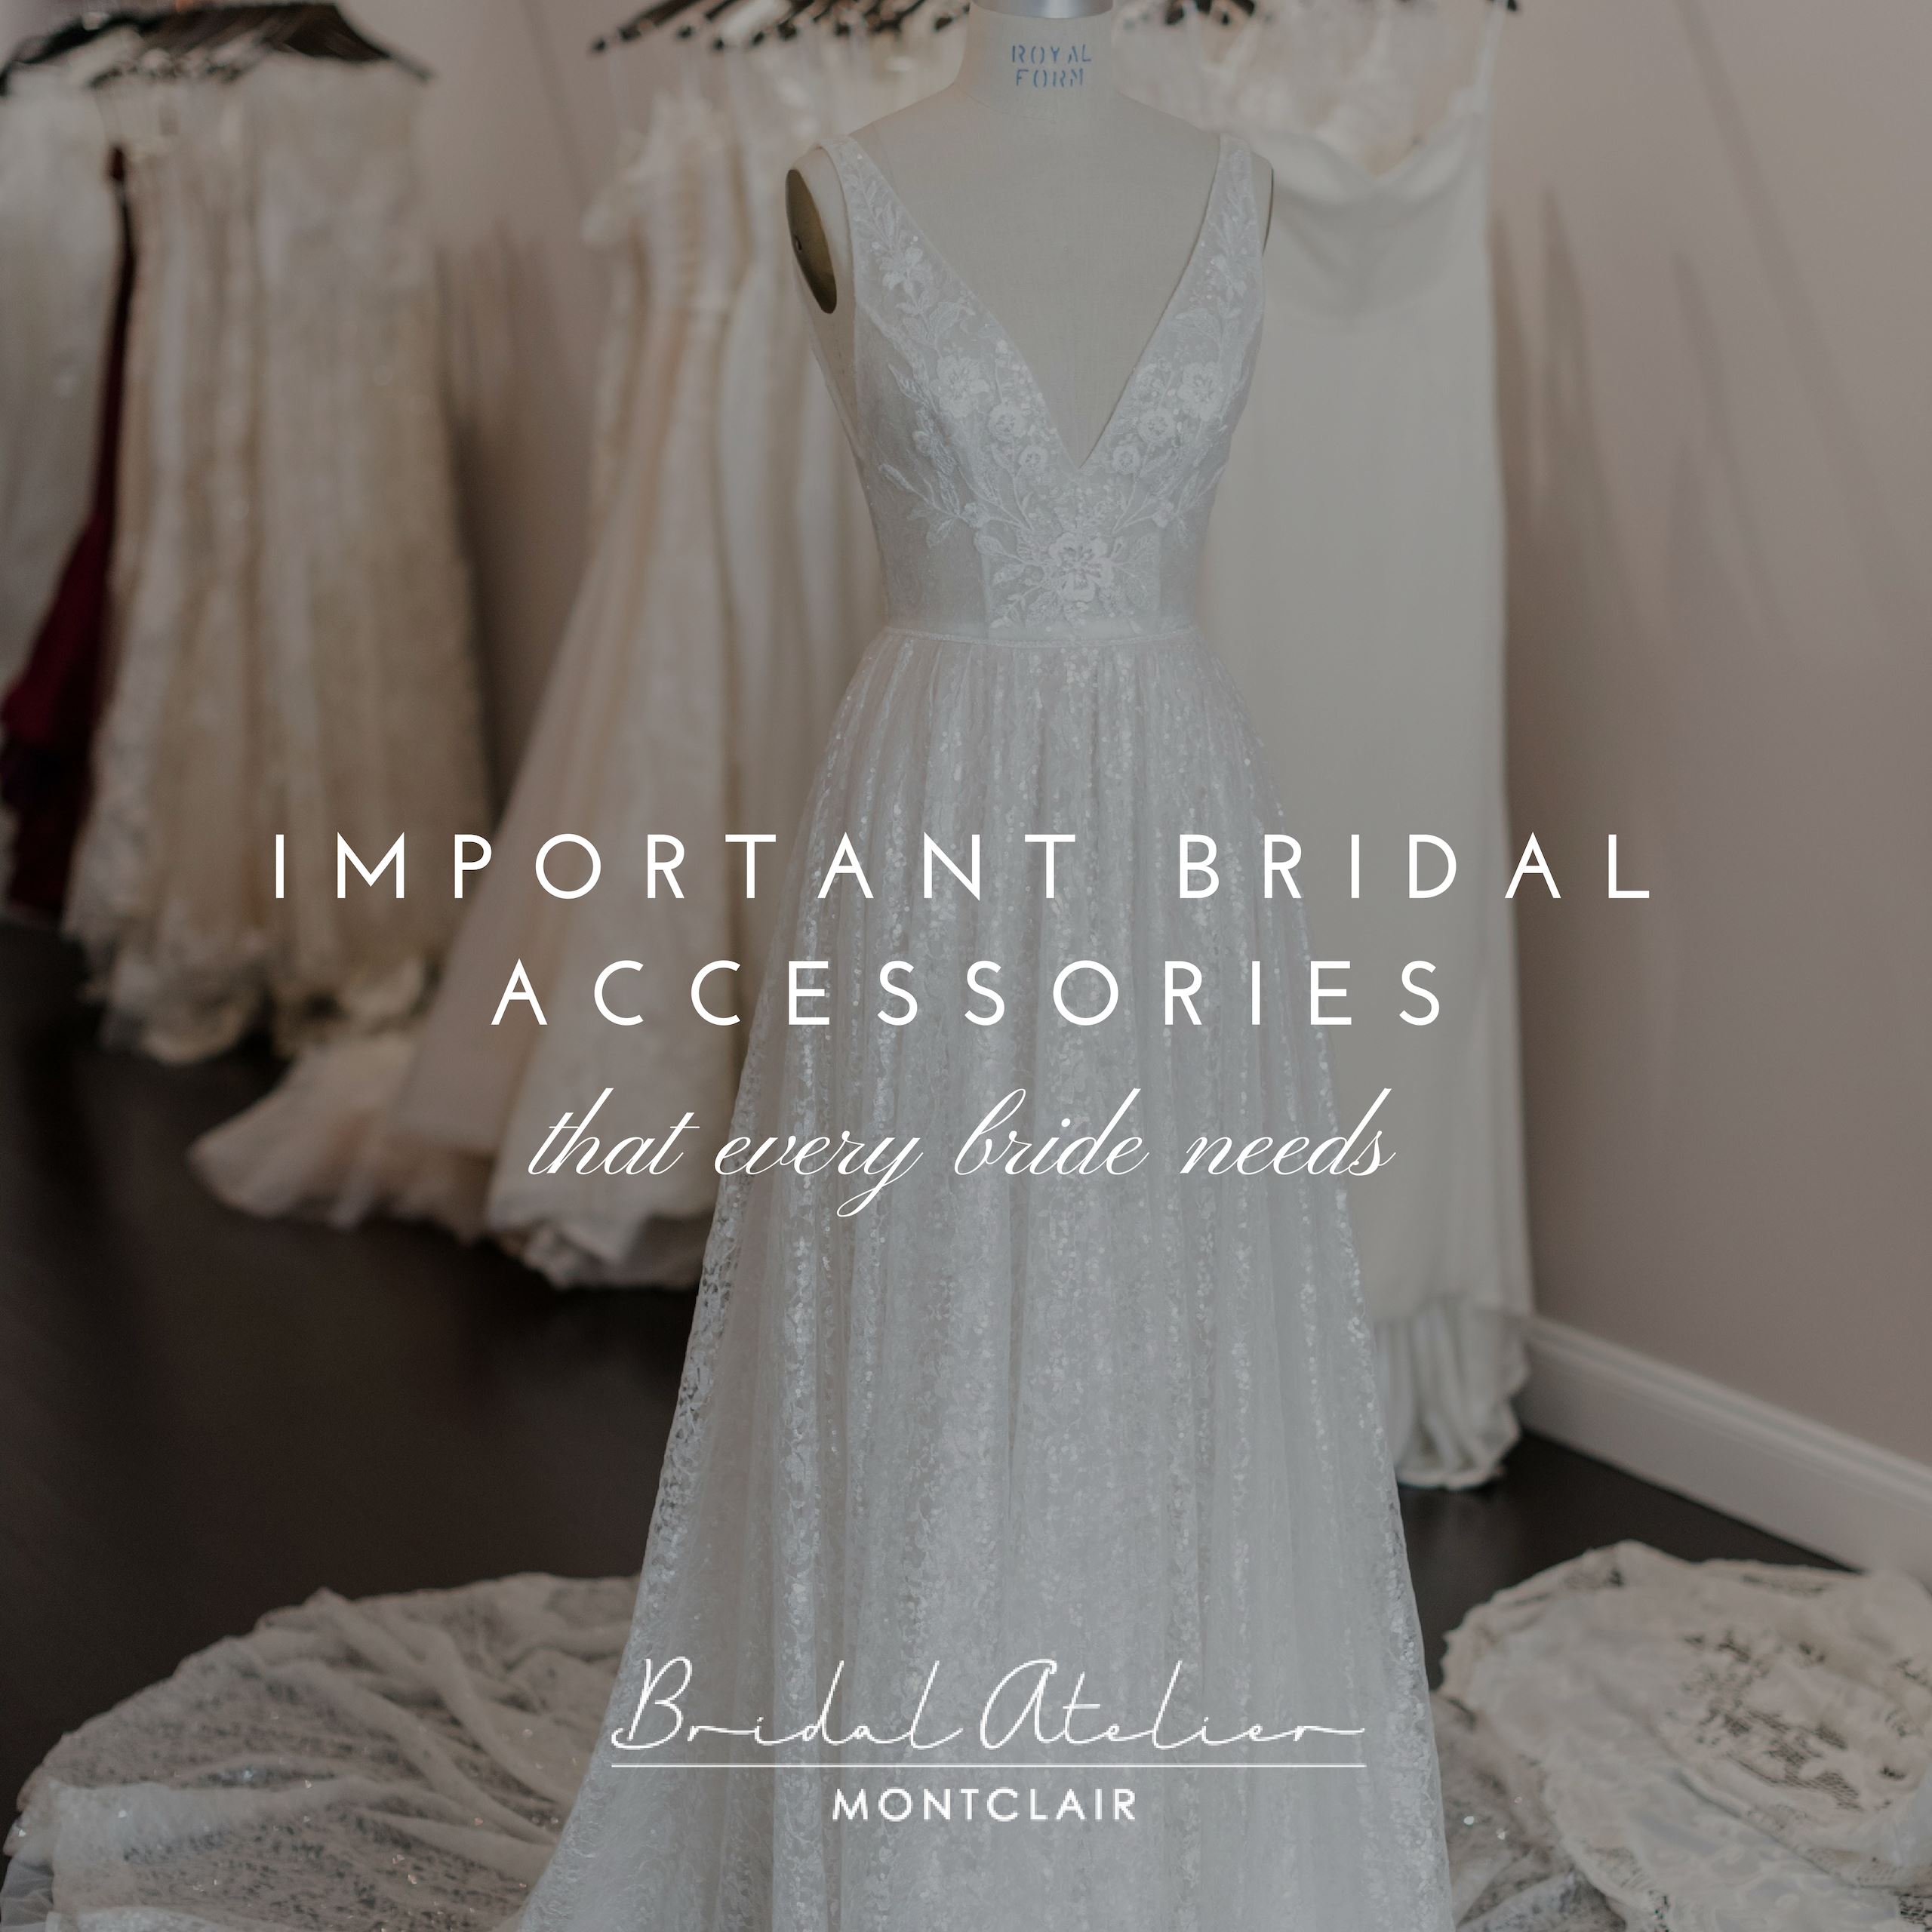 IMPORTANT BRIDAL ACCESSORIES THAT EVERY BRIDE NEEDS Image